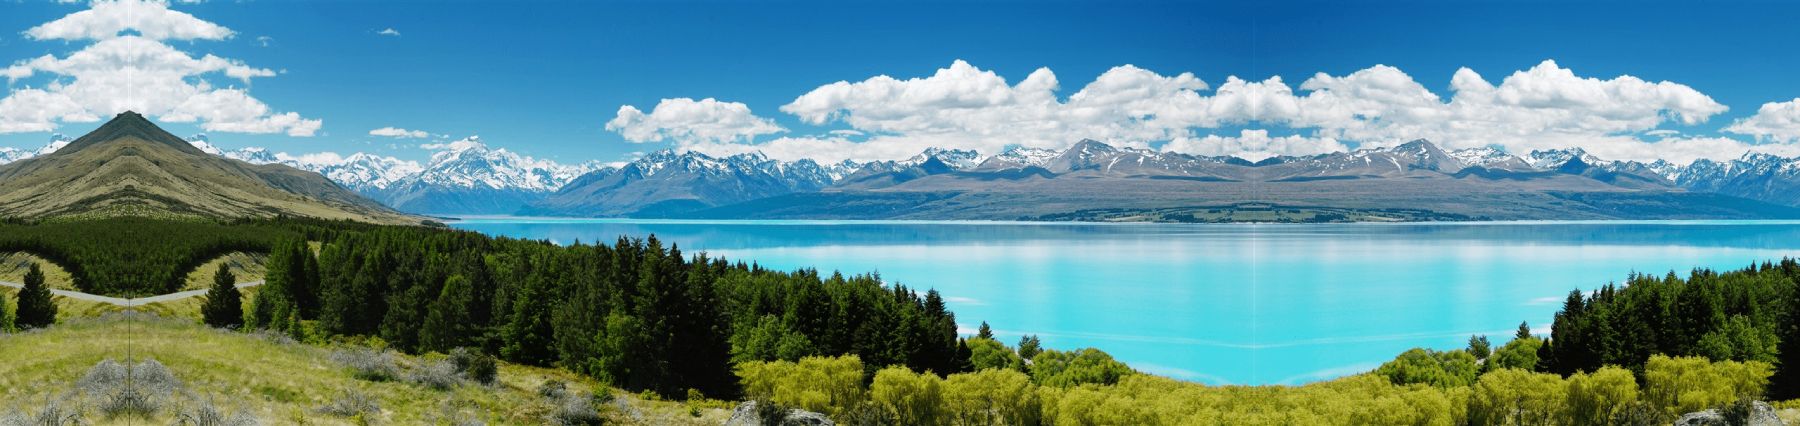 Most Liveable City In New Zealand Featured Image